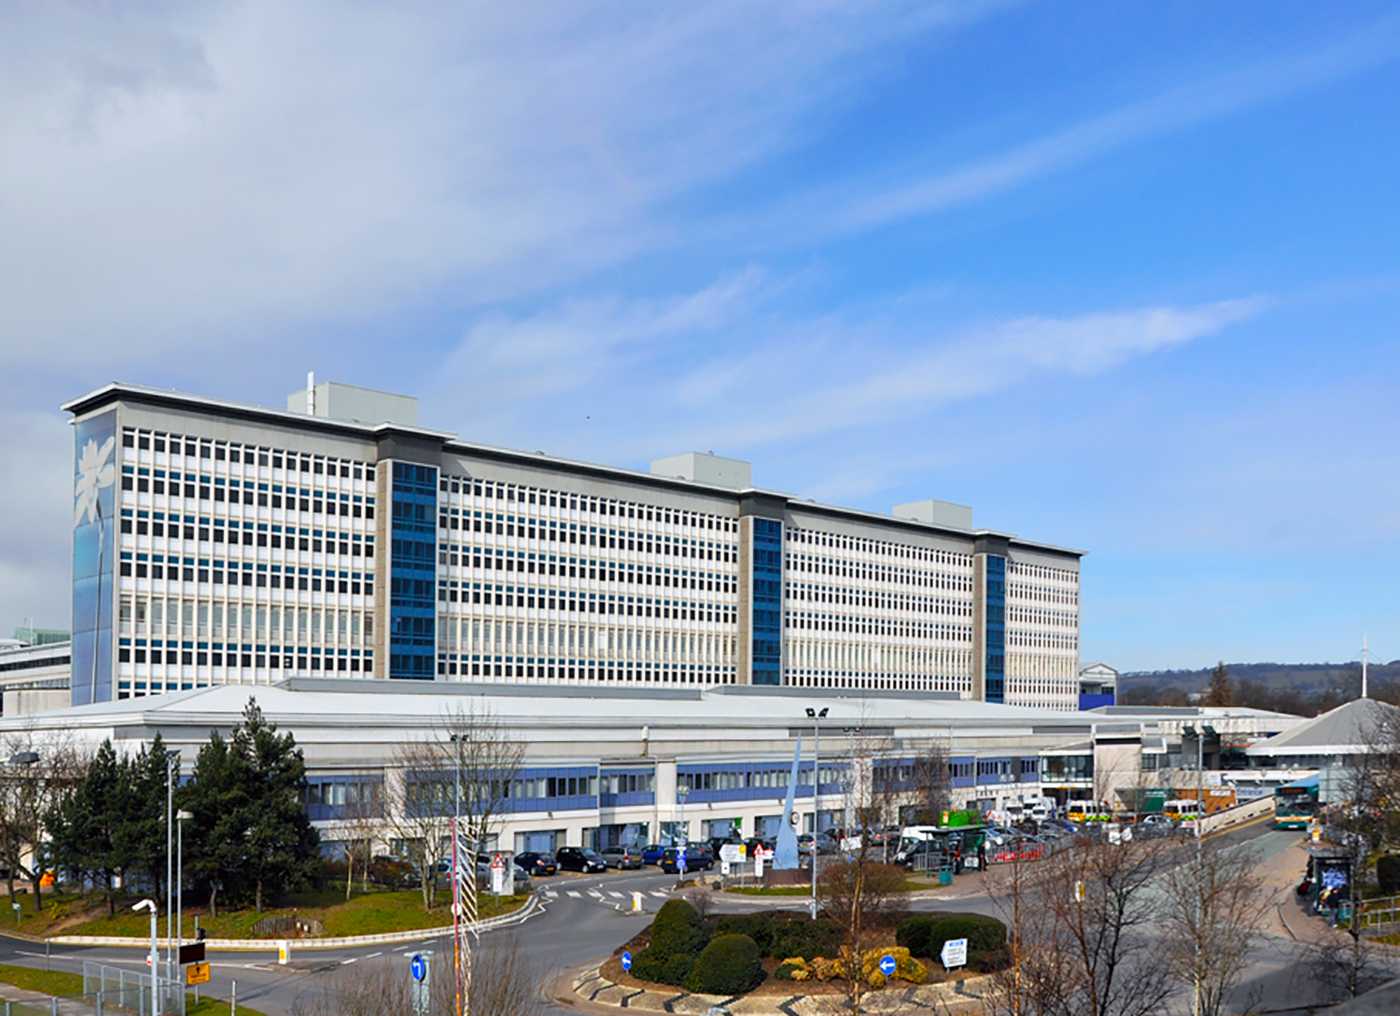 High-Efficiency Carrier Chillers Chosen for New MRI Scanner Facility at University Hospital of Wales